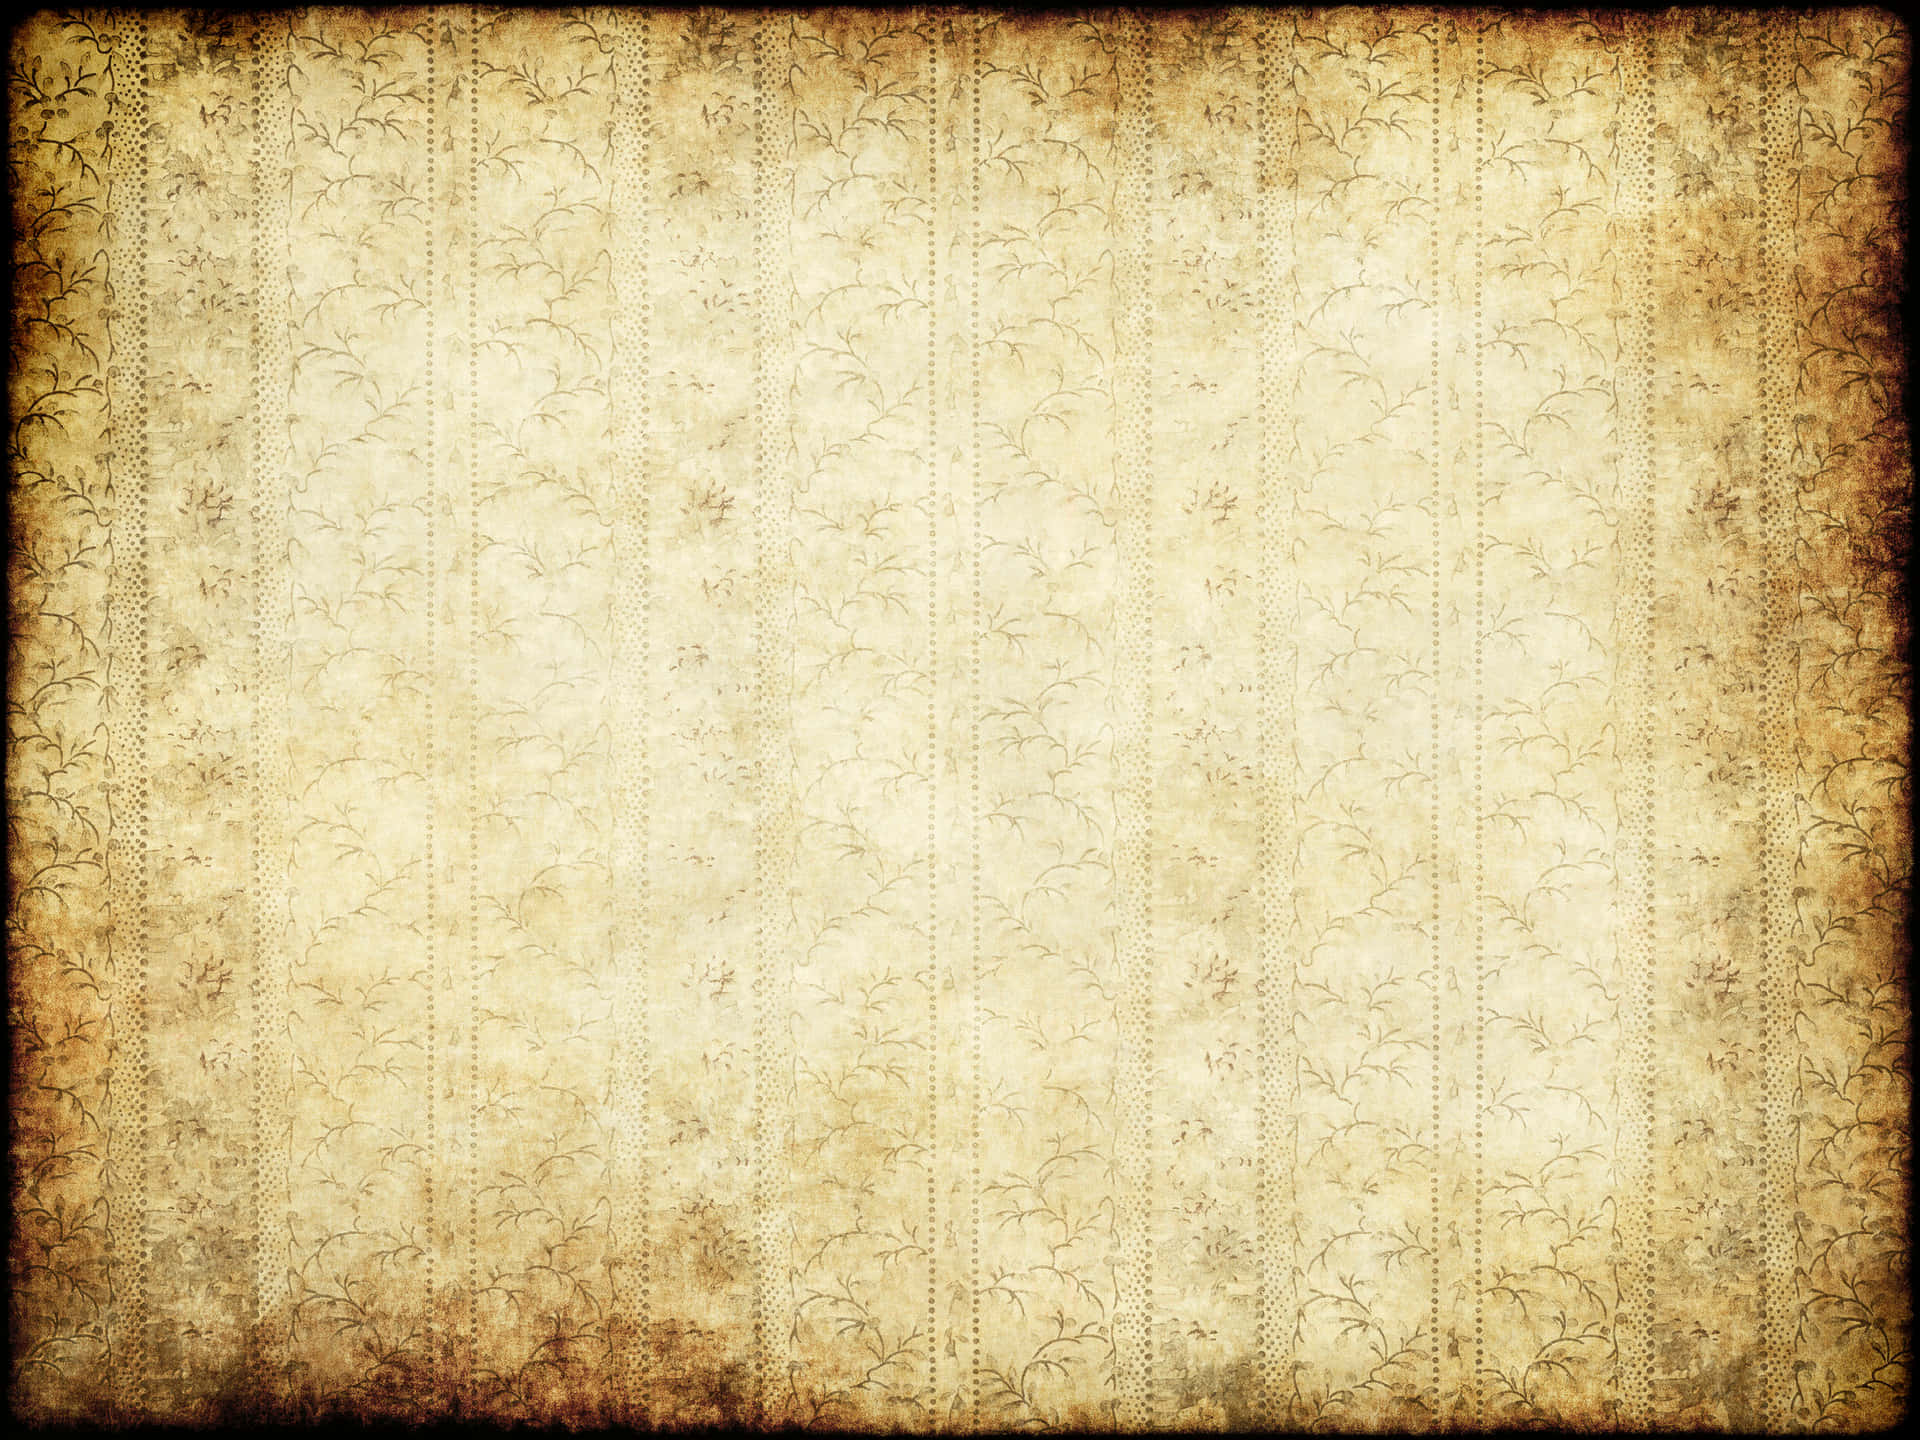 A close-up of a paper-textured background with embossed patterns.